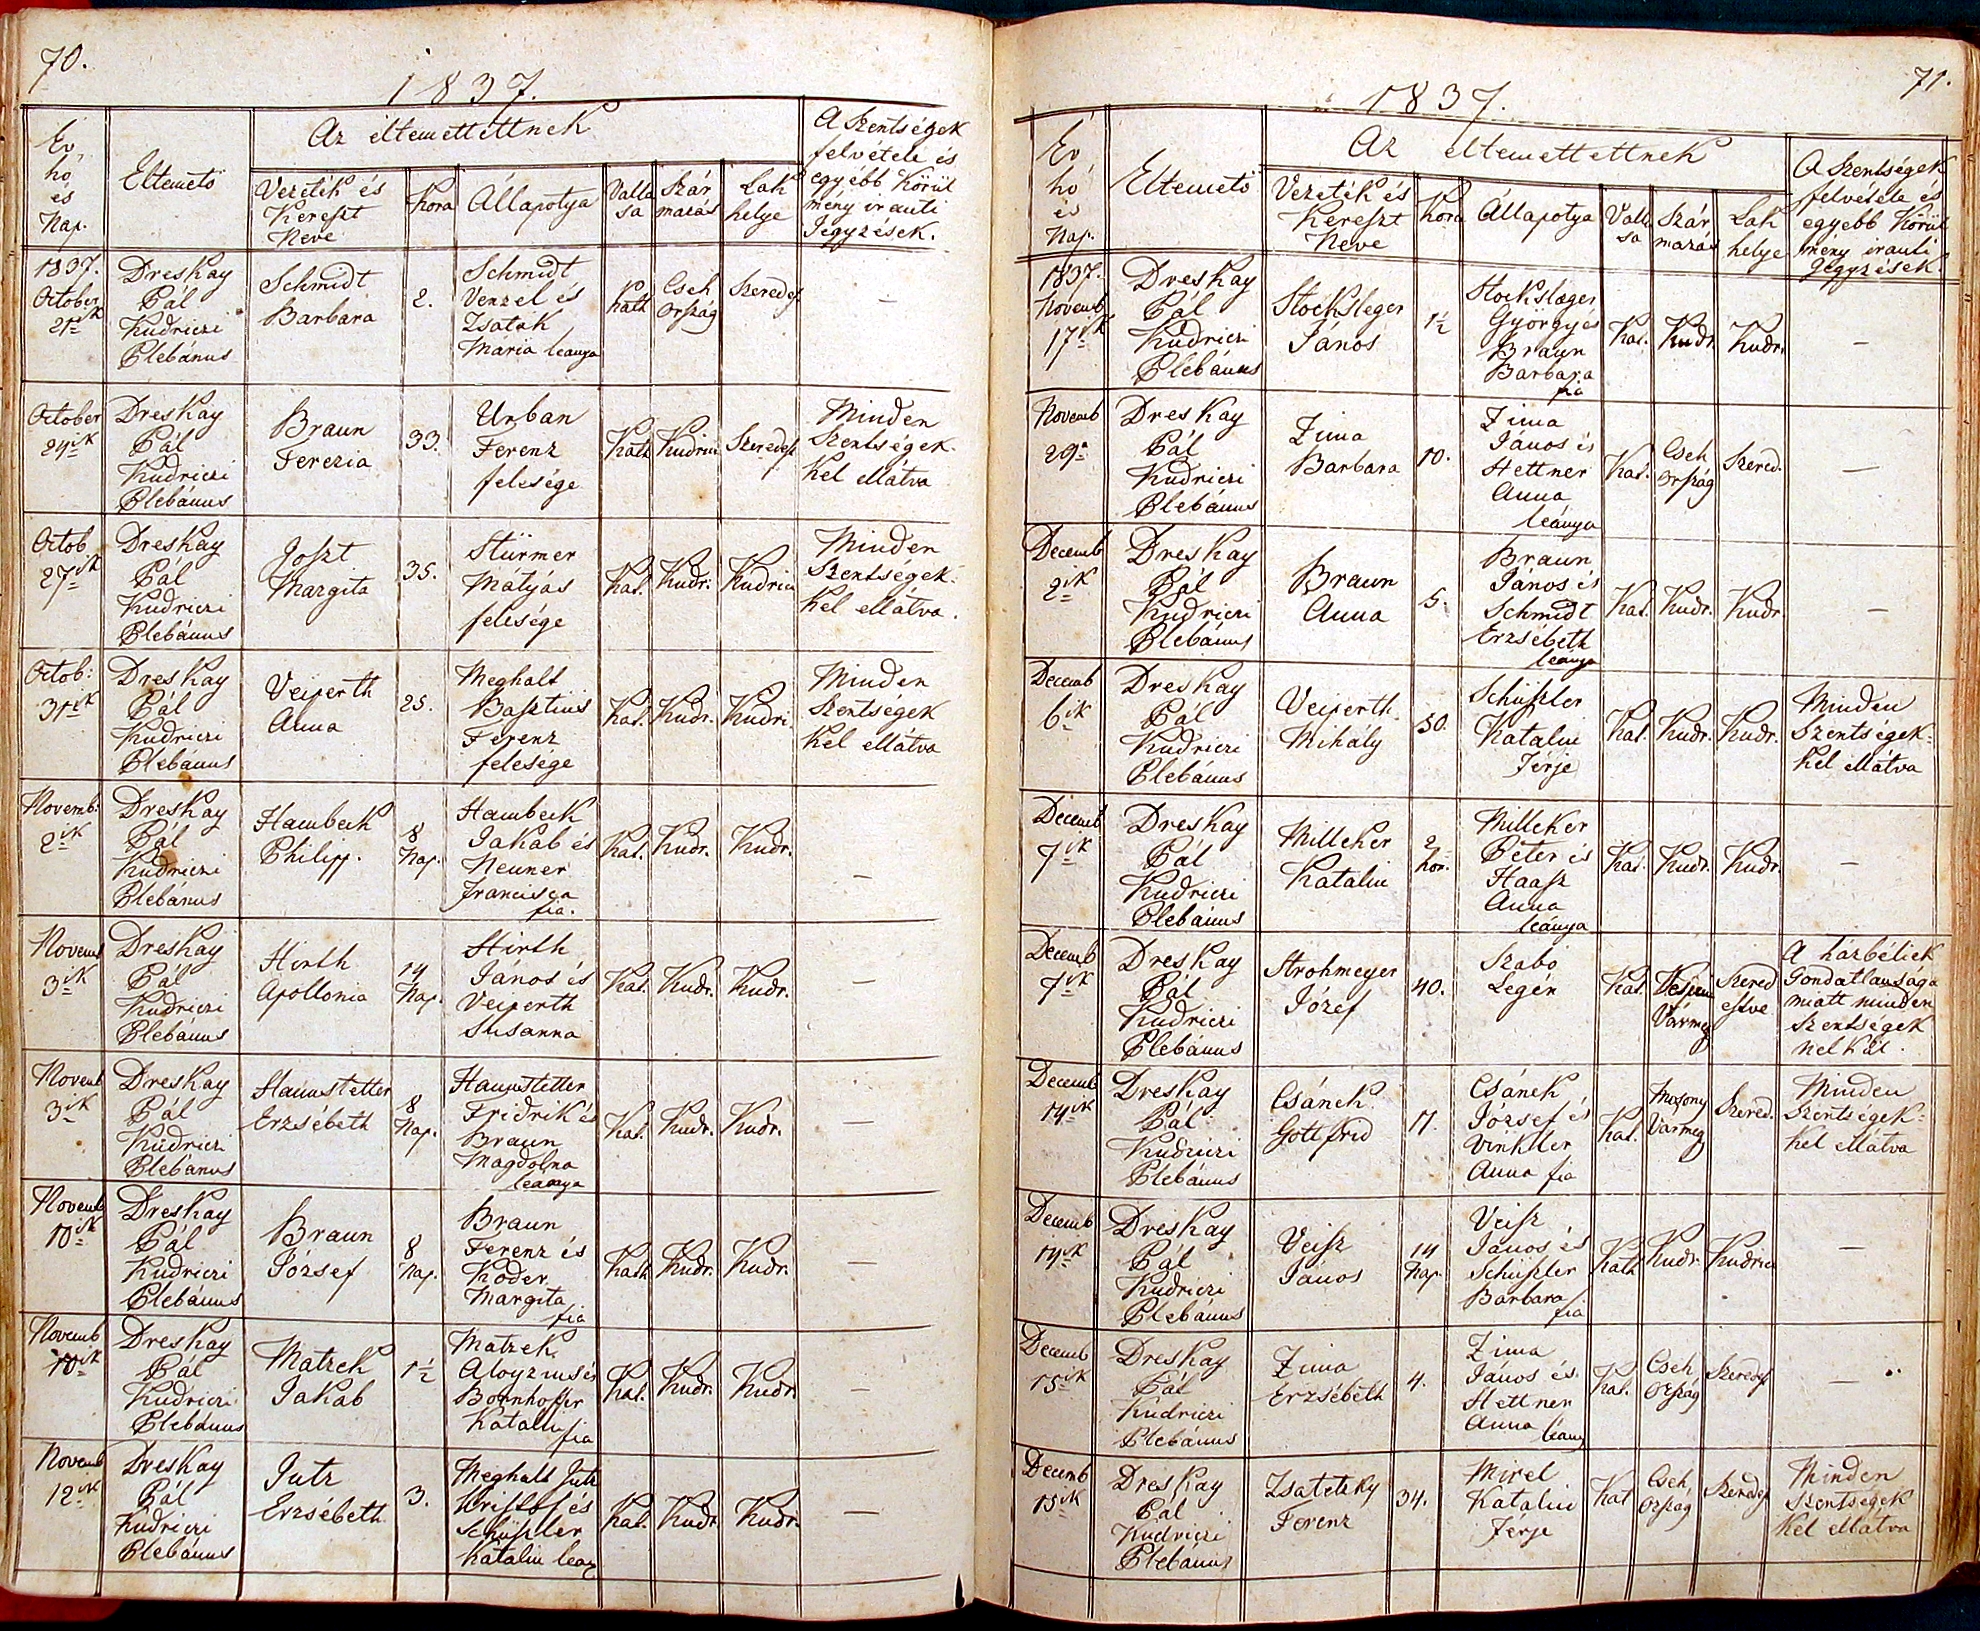 images/church_records/DEATHS/1775-1828D/070 i 071